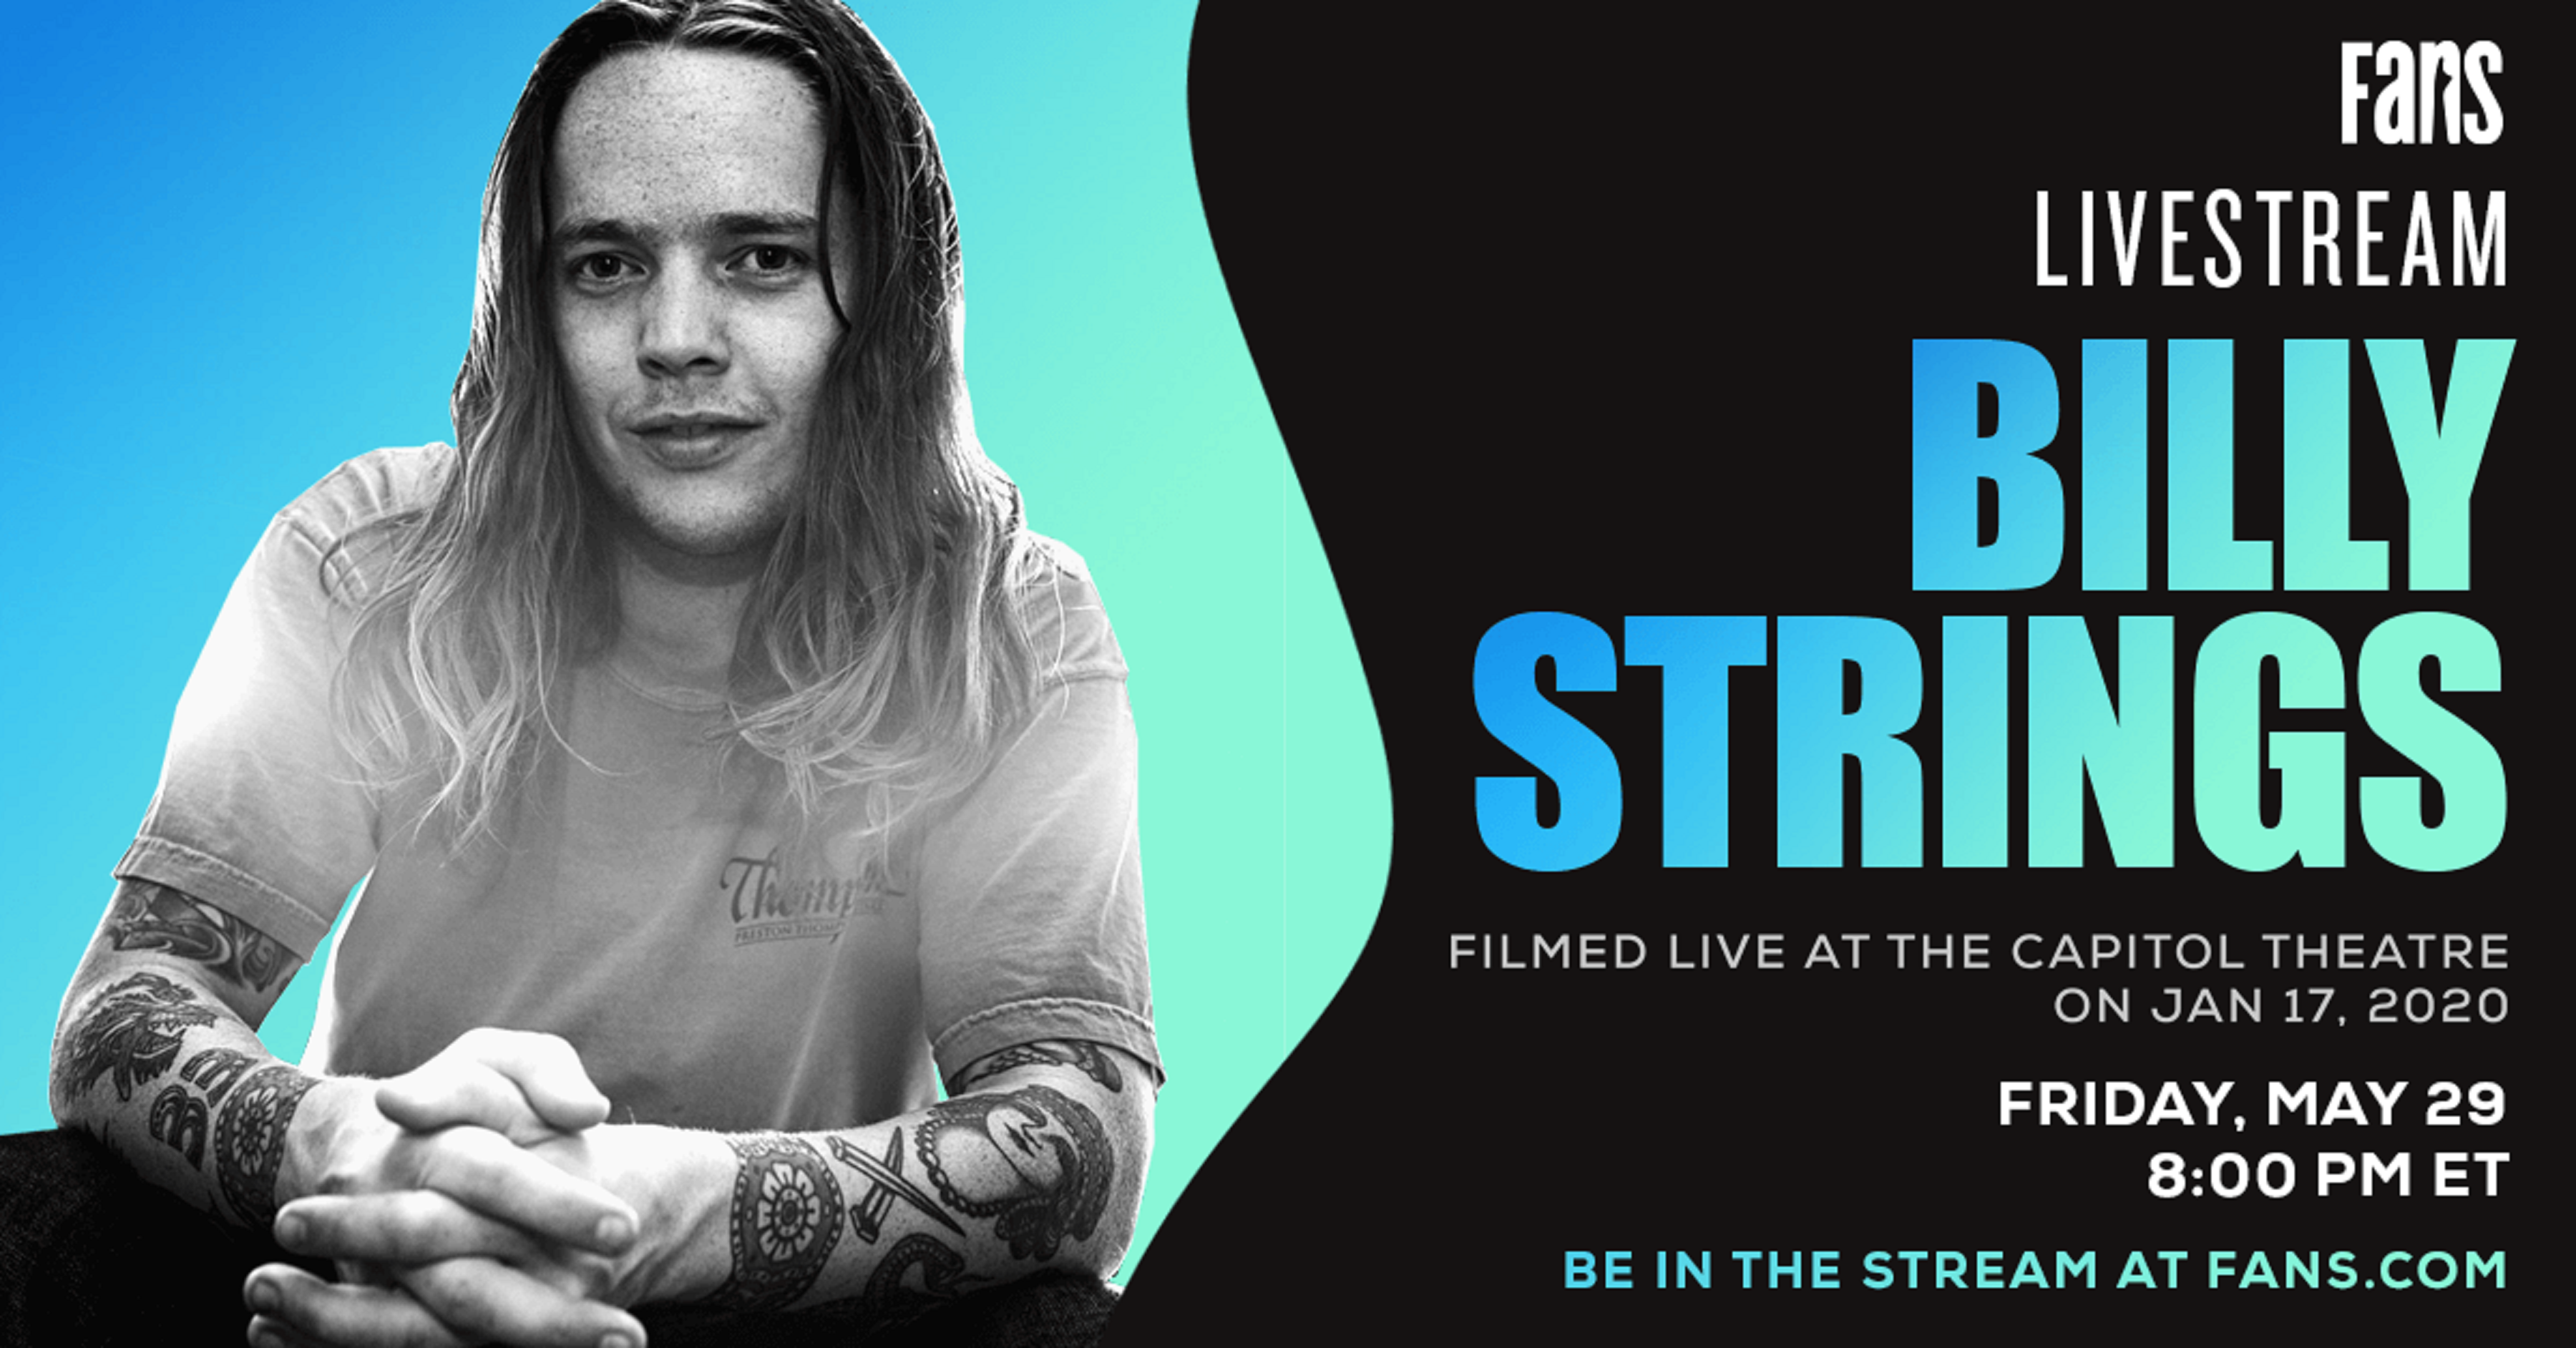 FANS announces Billy Strings livestream on Friday, May 29